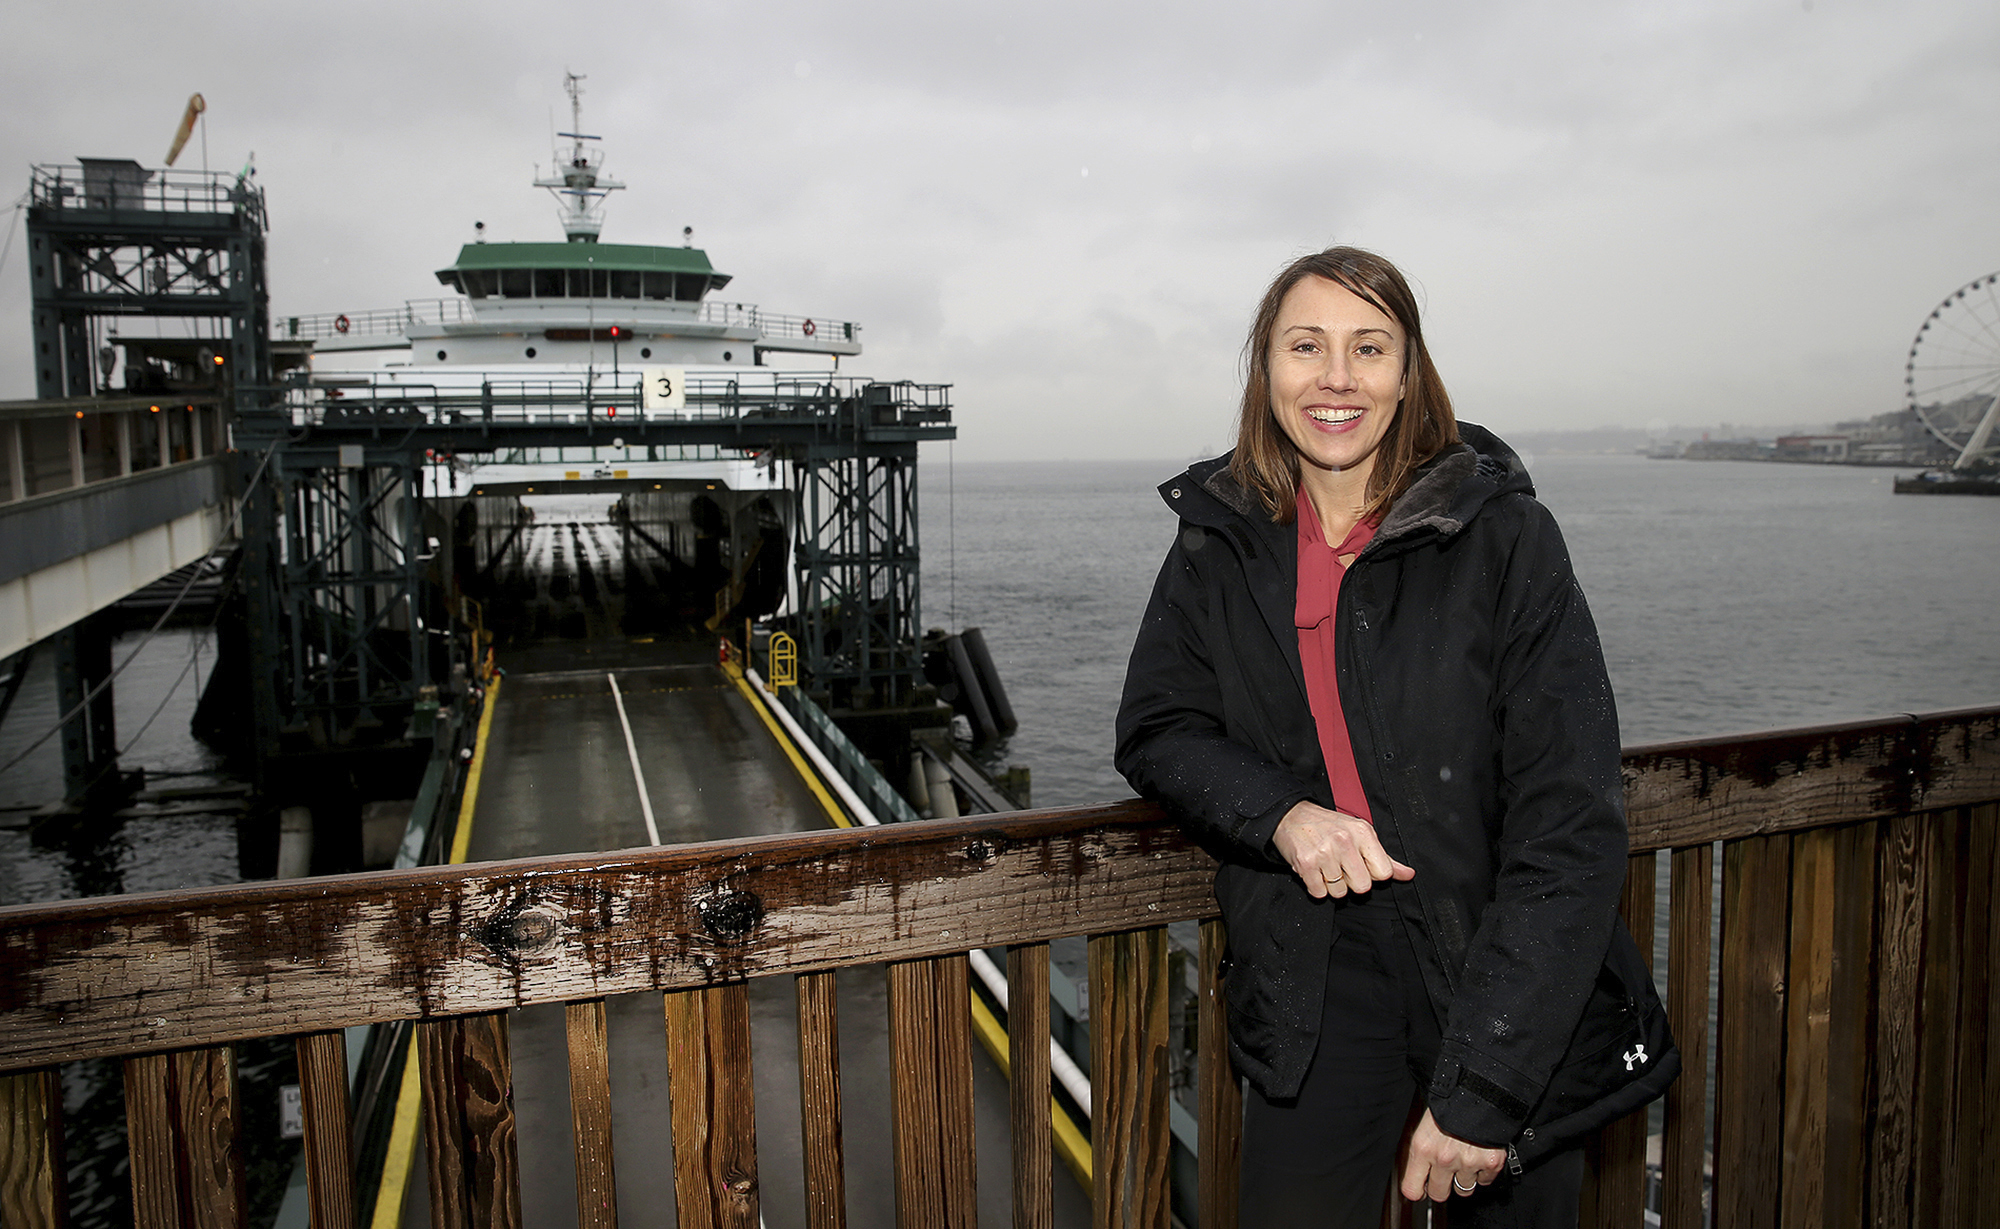 In this Feb. 8 photo, Amy Scarton, the new director of the Washington State Ferries, poses for a photo at Colman Dock in Seattle, Washington. (Larry Steagall | Kitsap Sun)